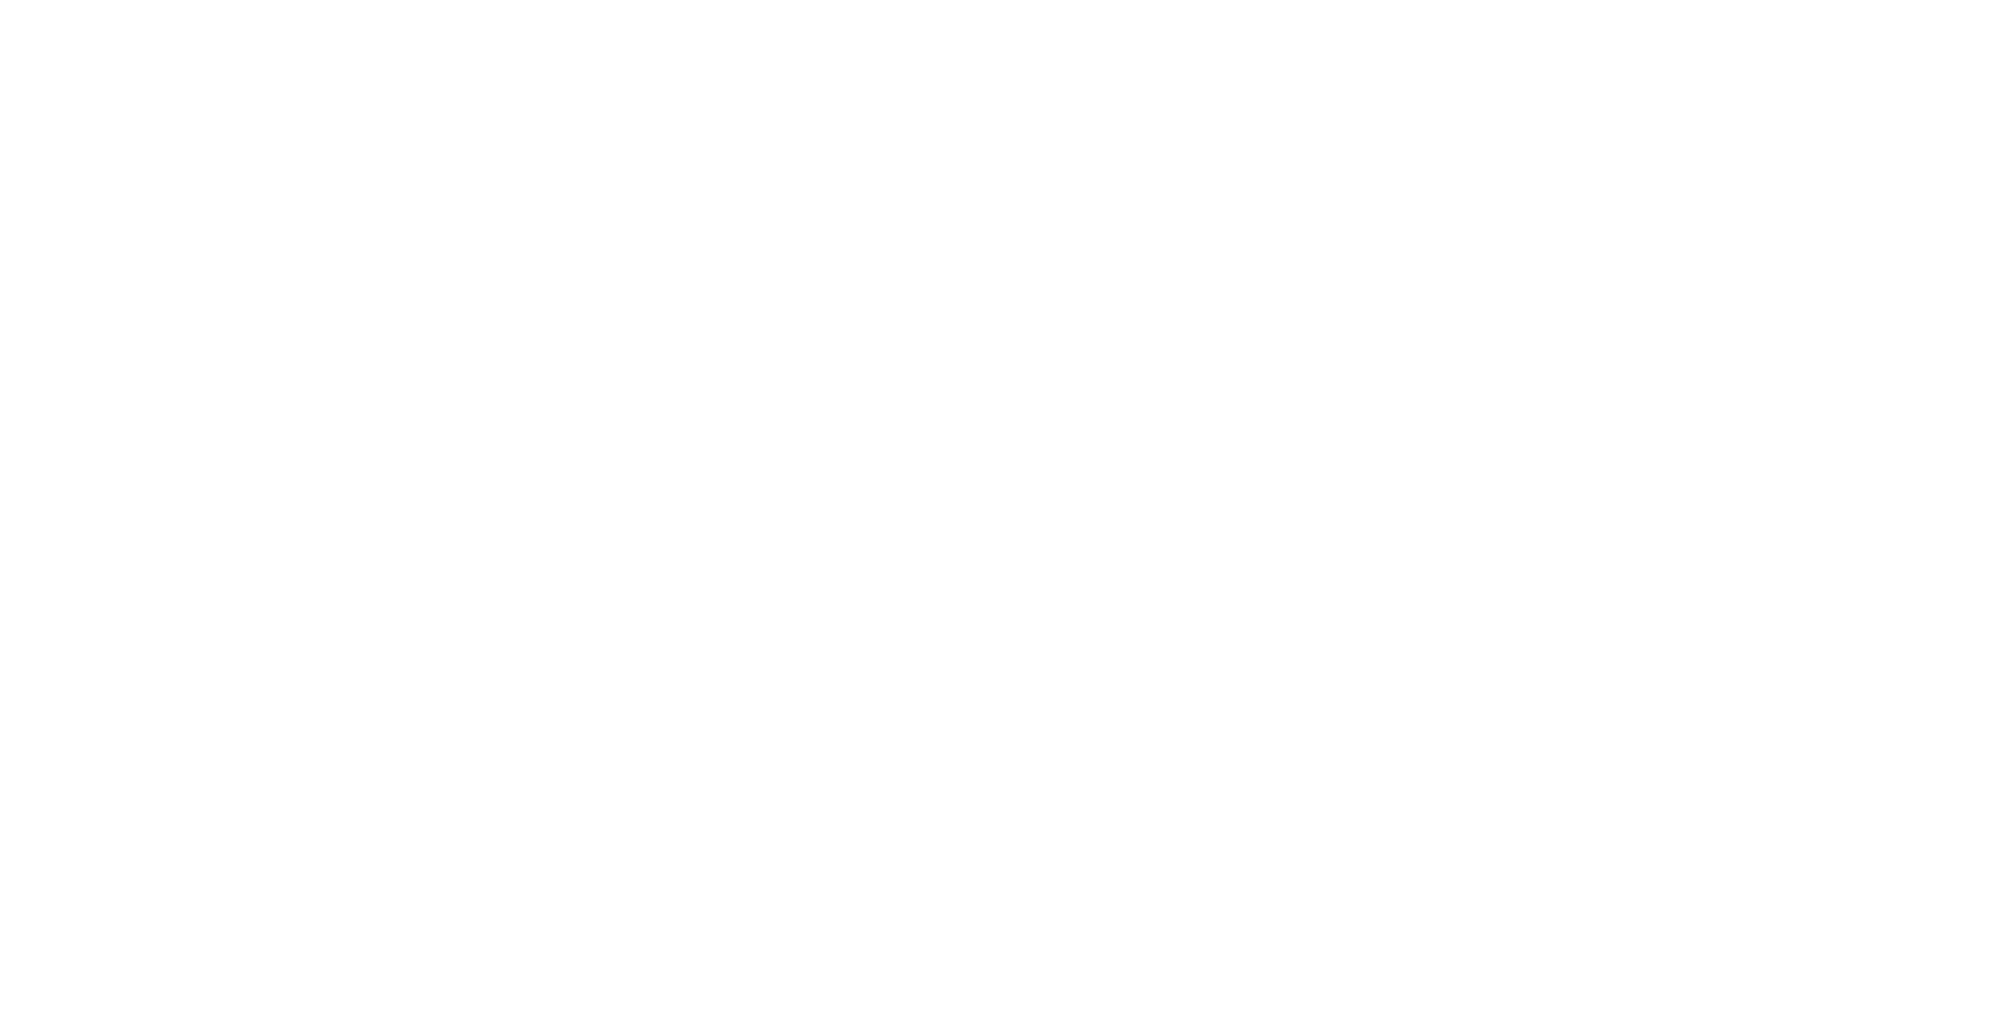 Understand the body language and behaviors of resource-guarding and that the value of the possession is from the dog’s perspective. This means a dog can resource-guard items other than food, beds or toys.